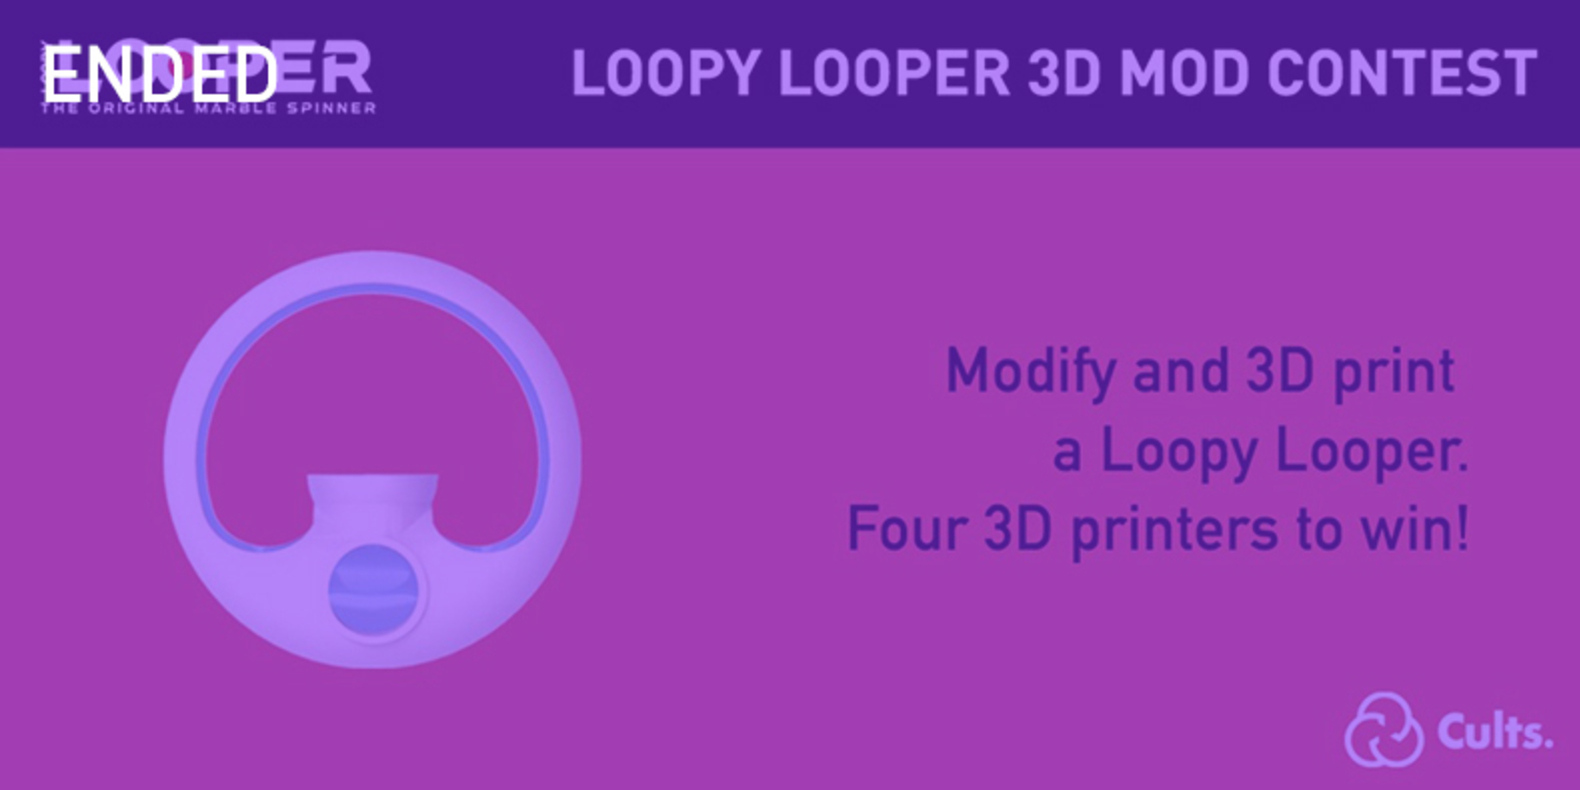 The challenge of modifying and 3D printing the Loopy Looper